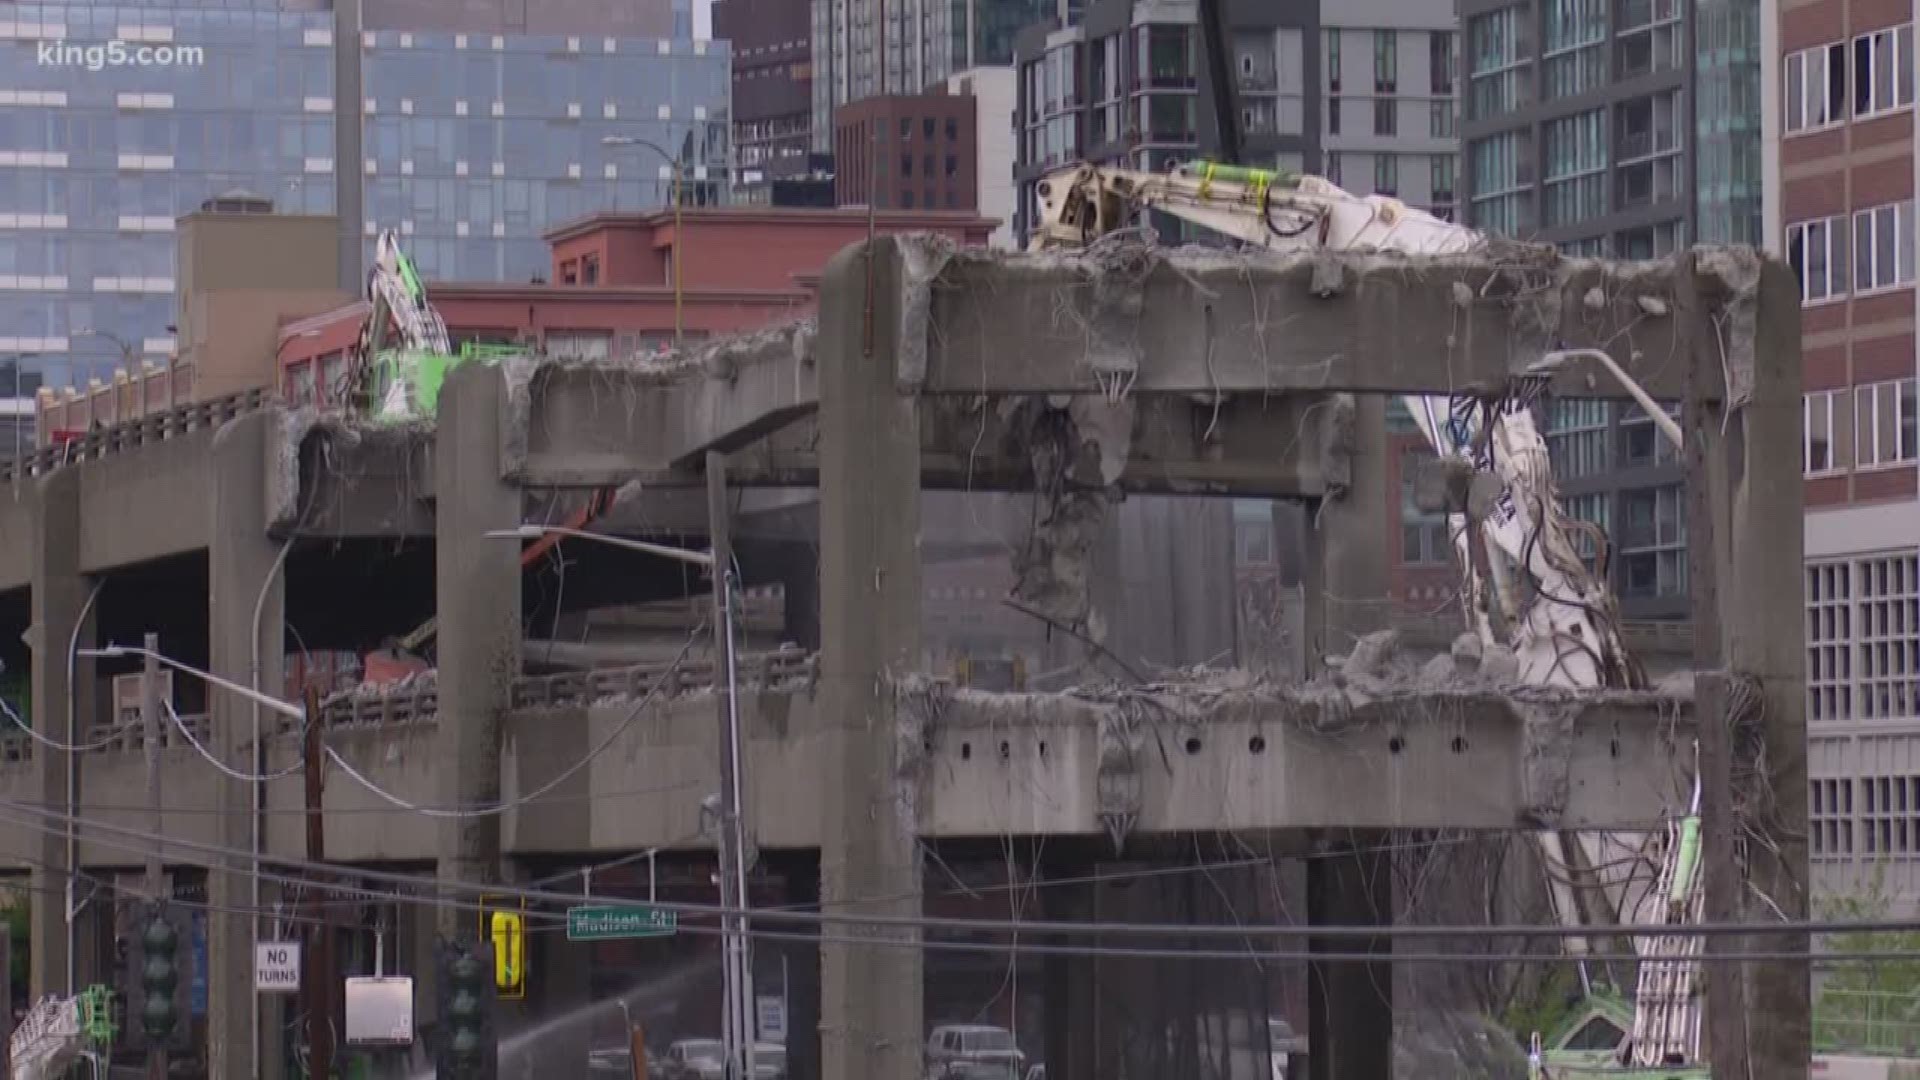 Businesses along the Seattle waterfront have been told viaduct demolition is about 3 weeks behind schedule. They are now worried about the impact this could have on business during the summer tourism season. KING 5's Kalie Greenberg explains what is happening.